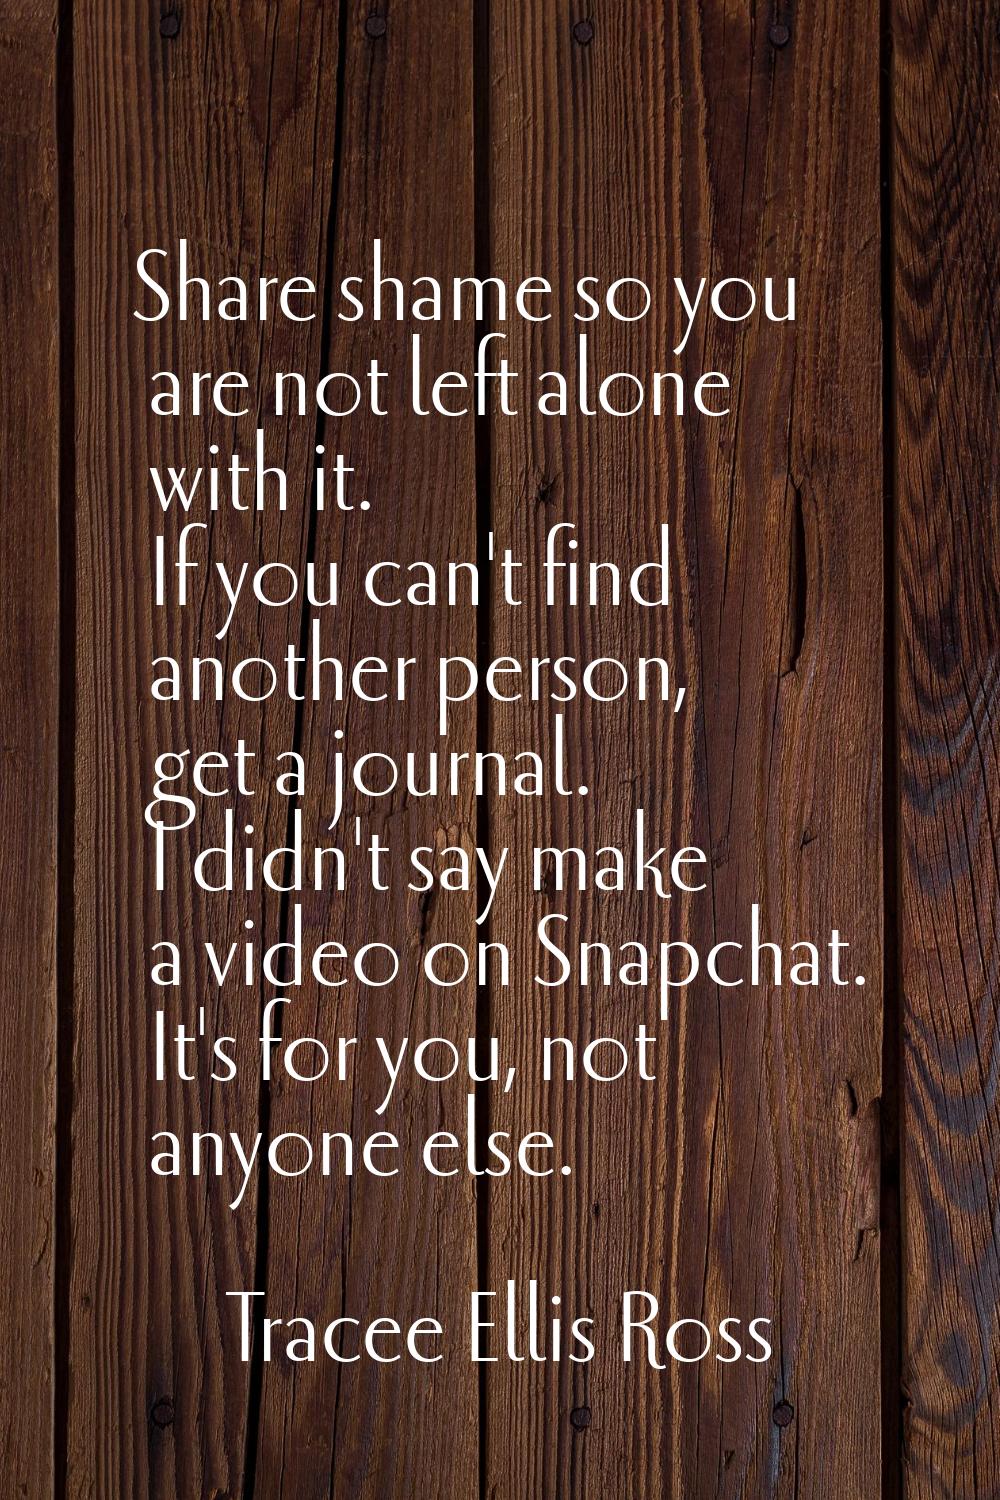 Share shame so you are not left alone with it. If you can't find another person, get a journal. I d